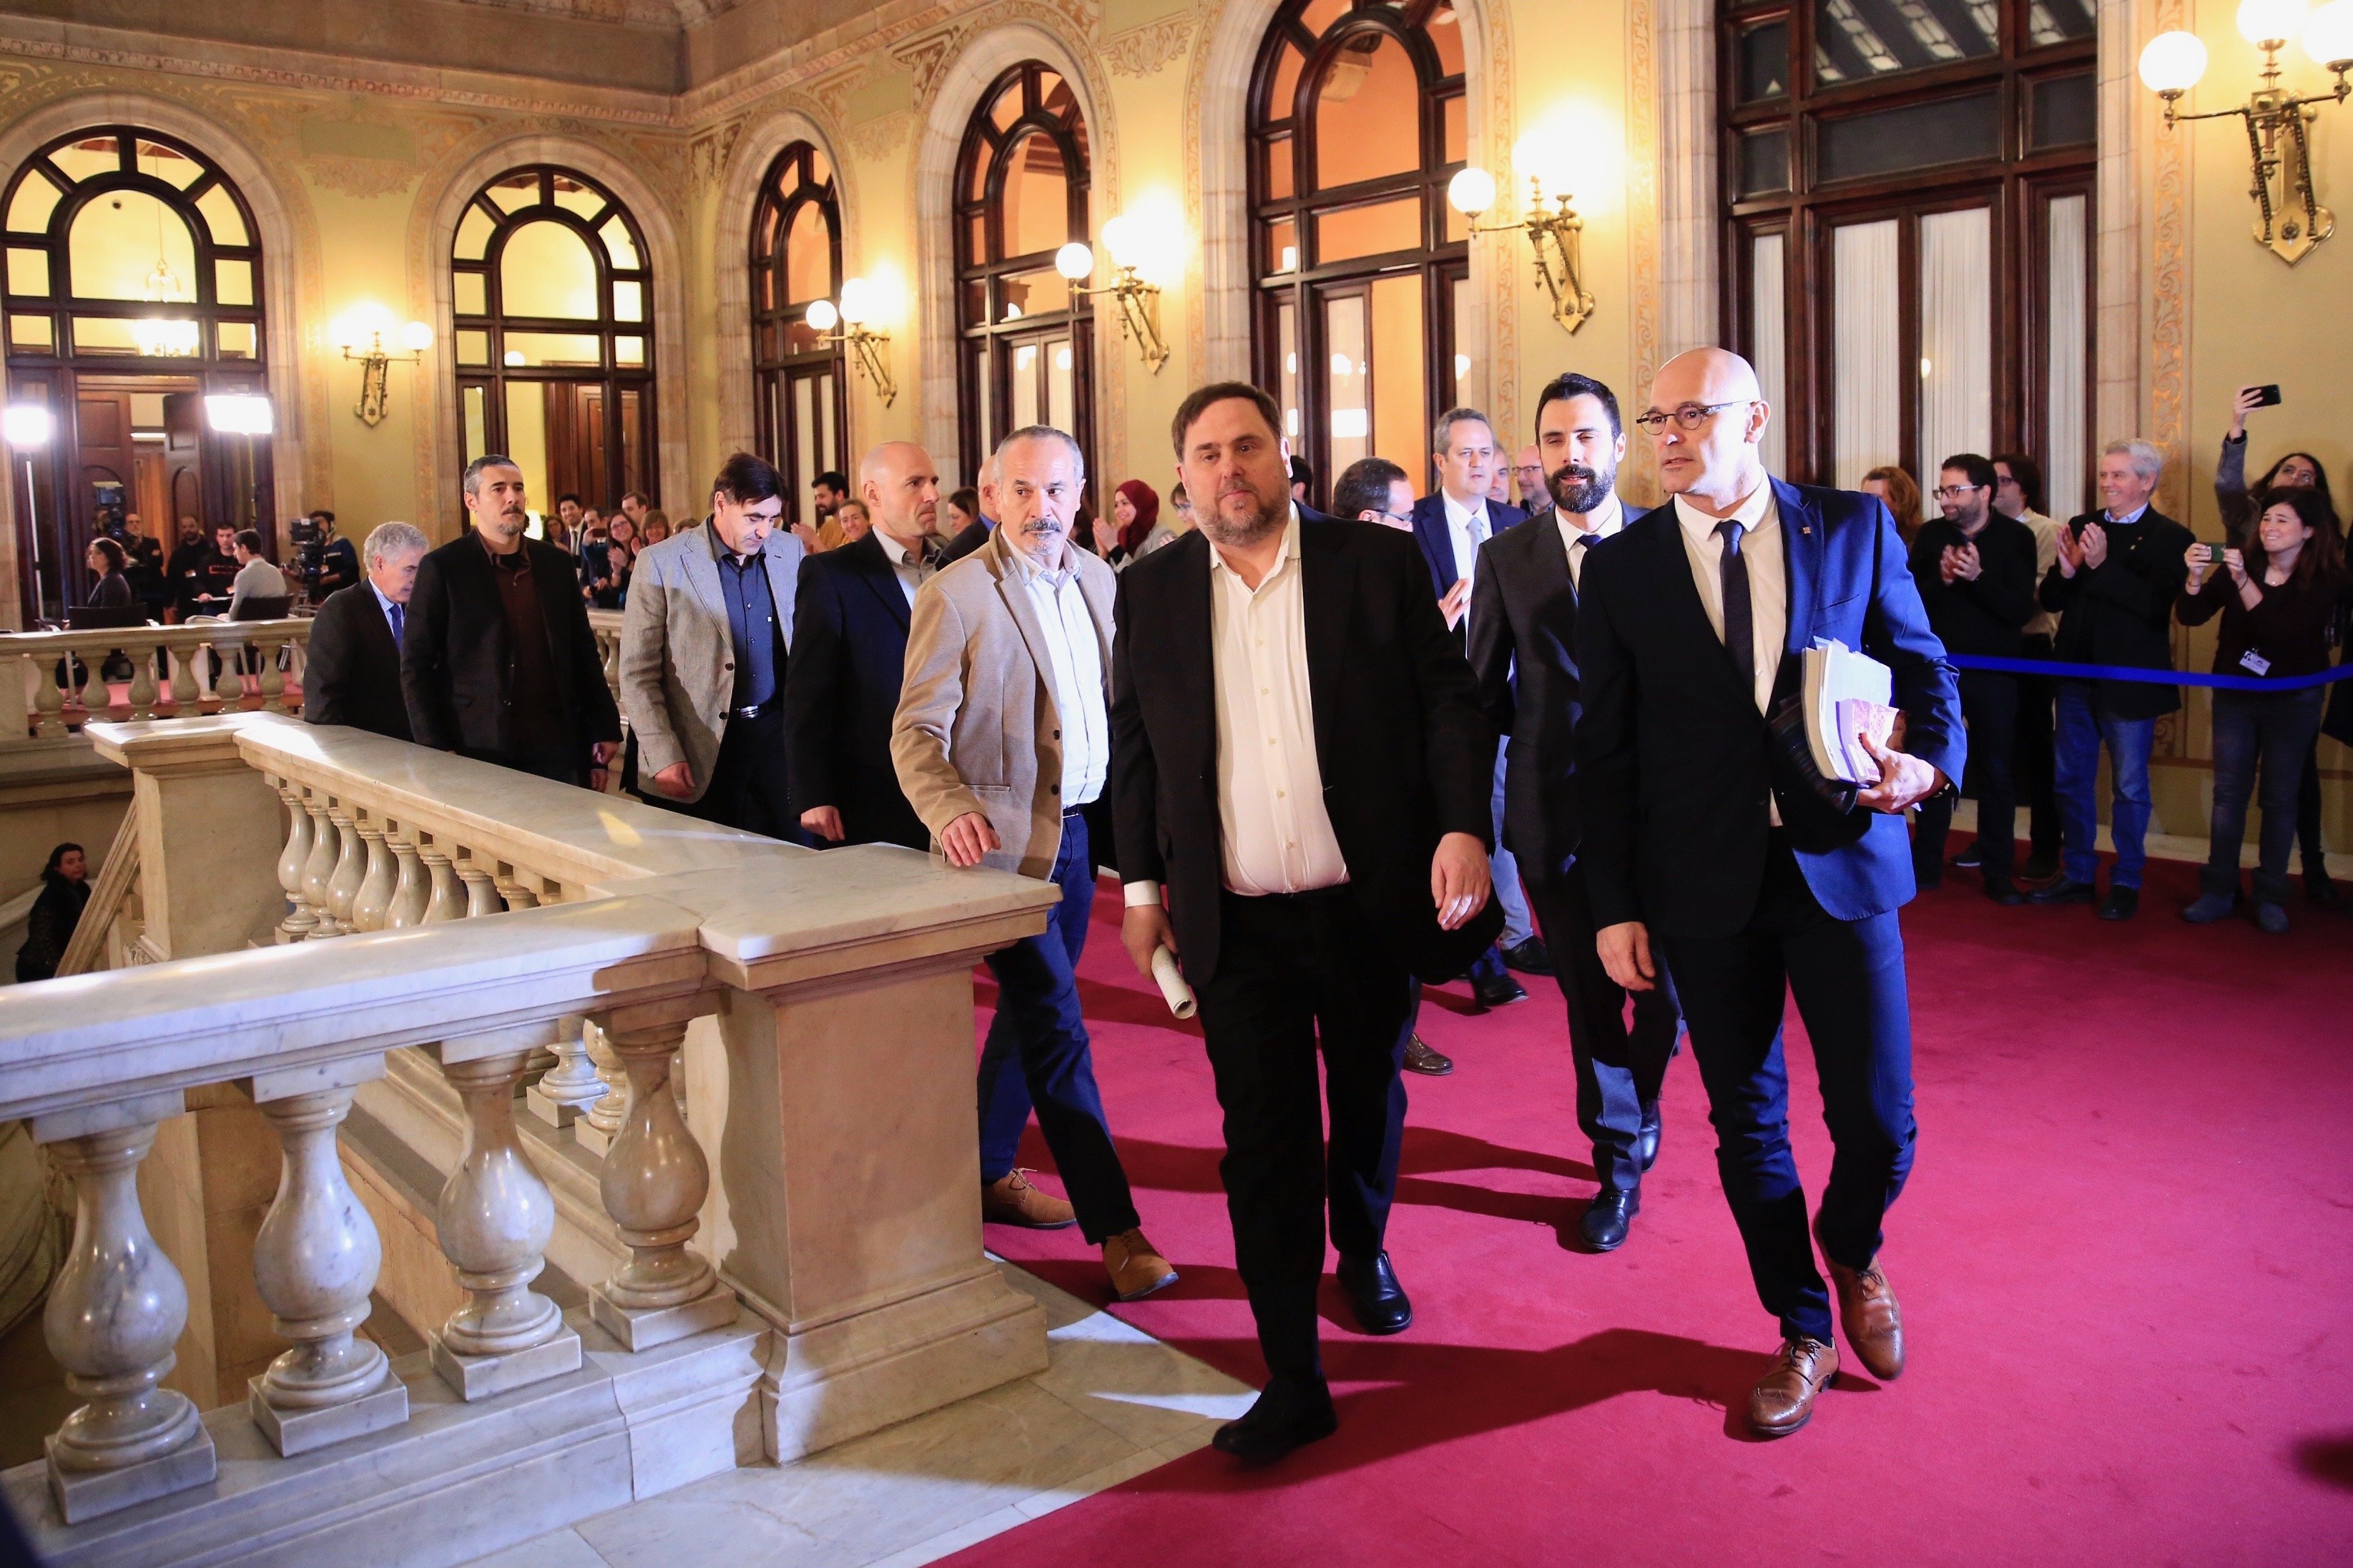 Catalan politicians Junqueras and Romeva will also leave prison daily on work leave